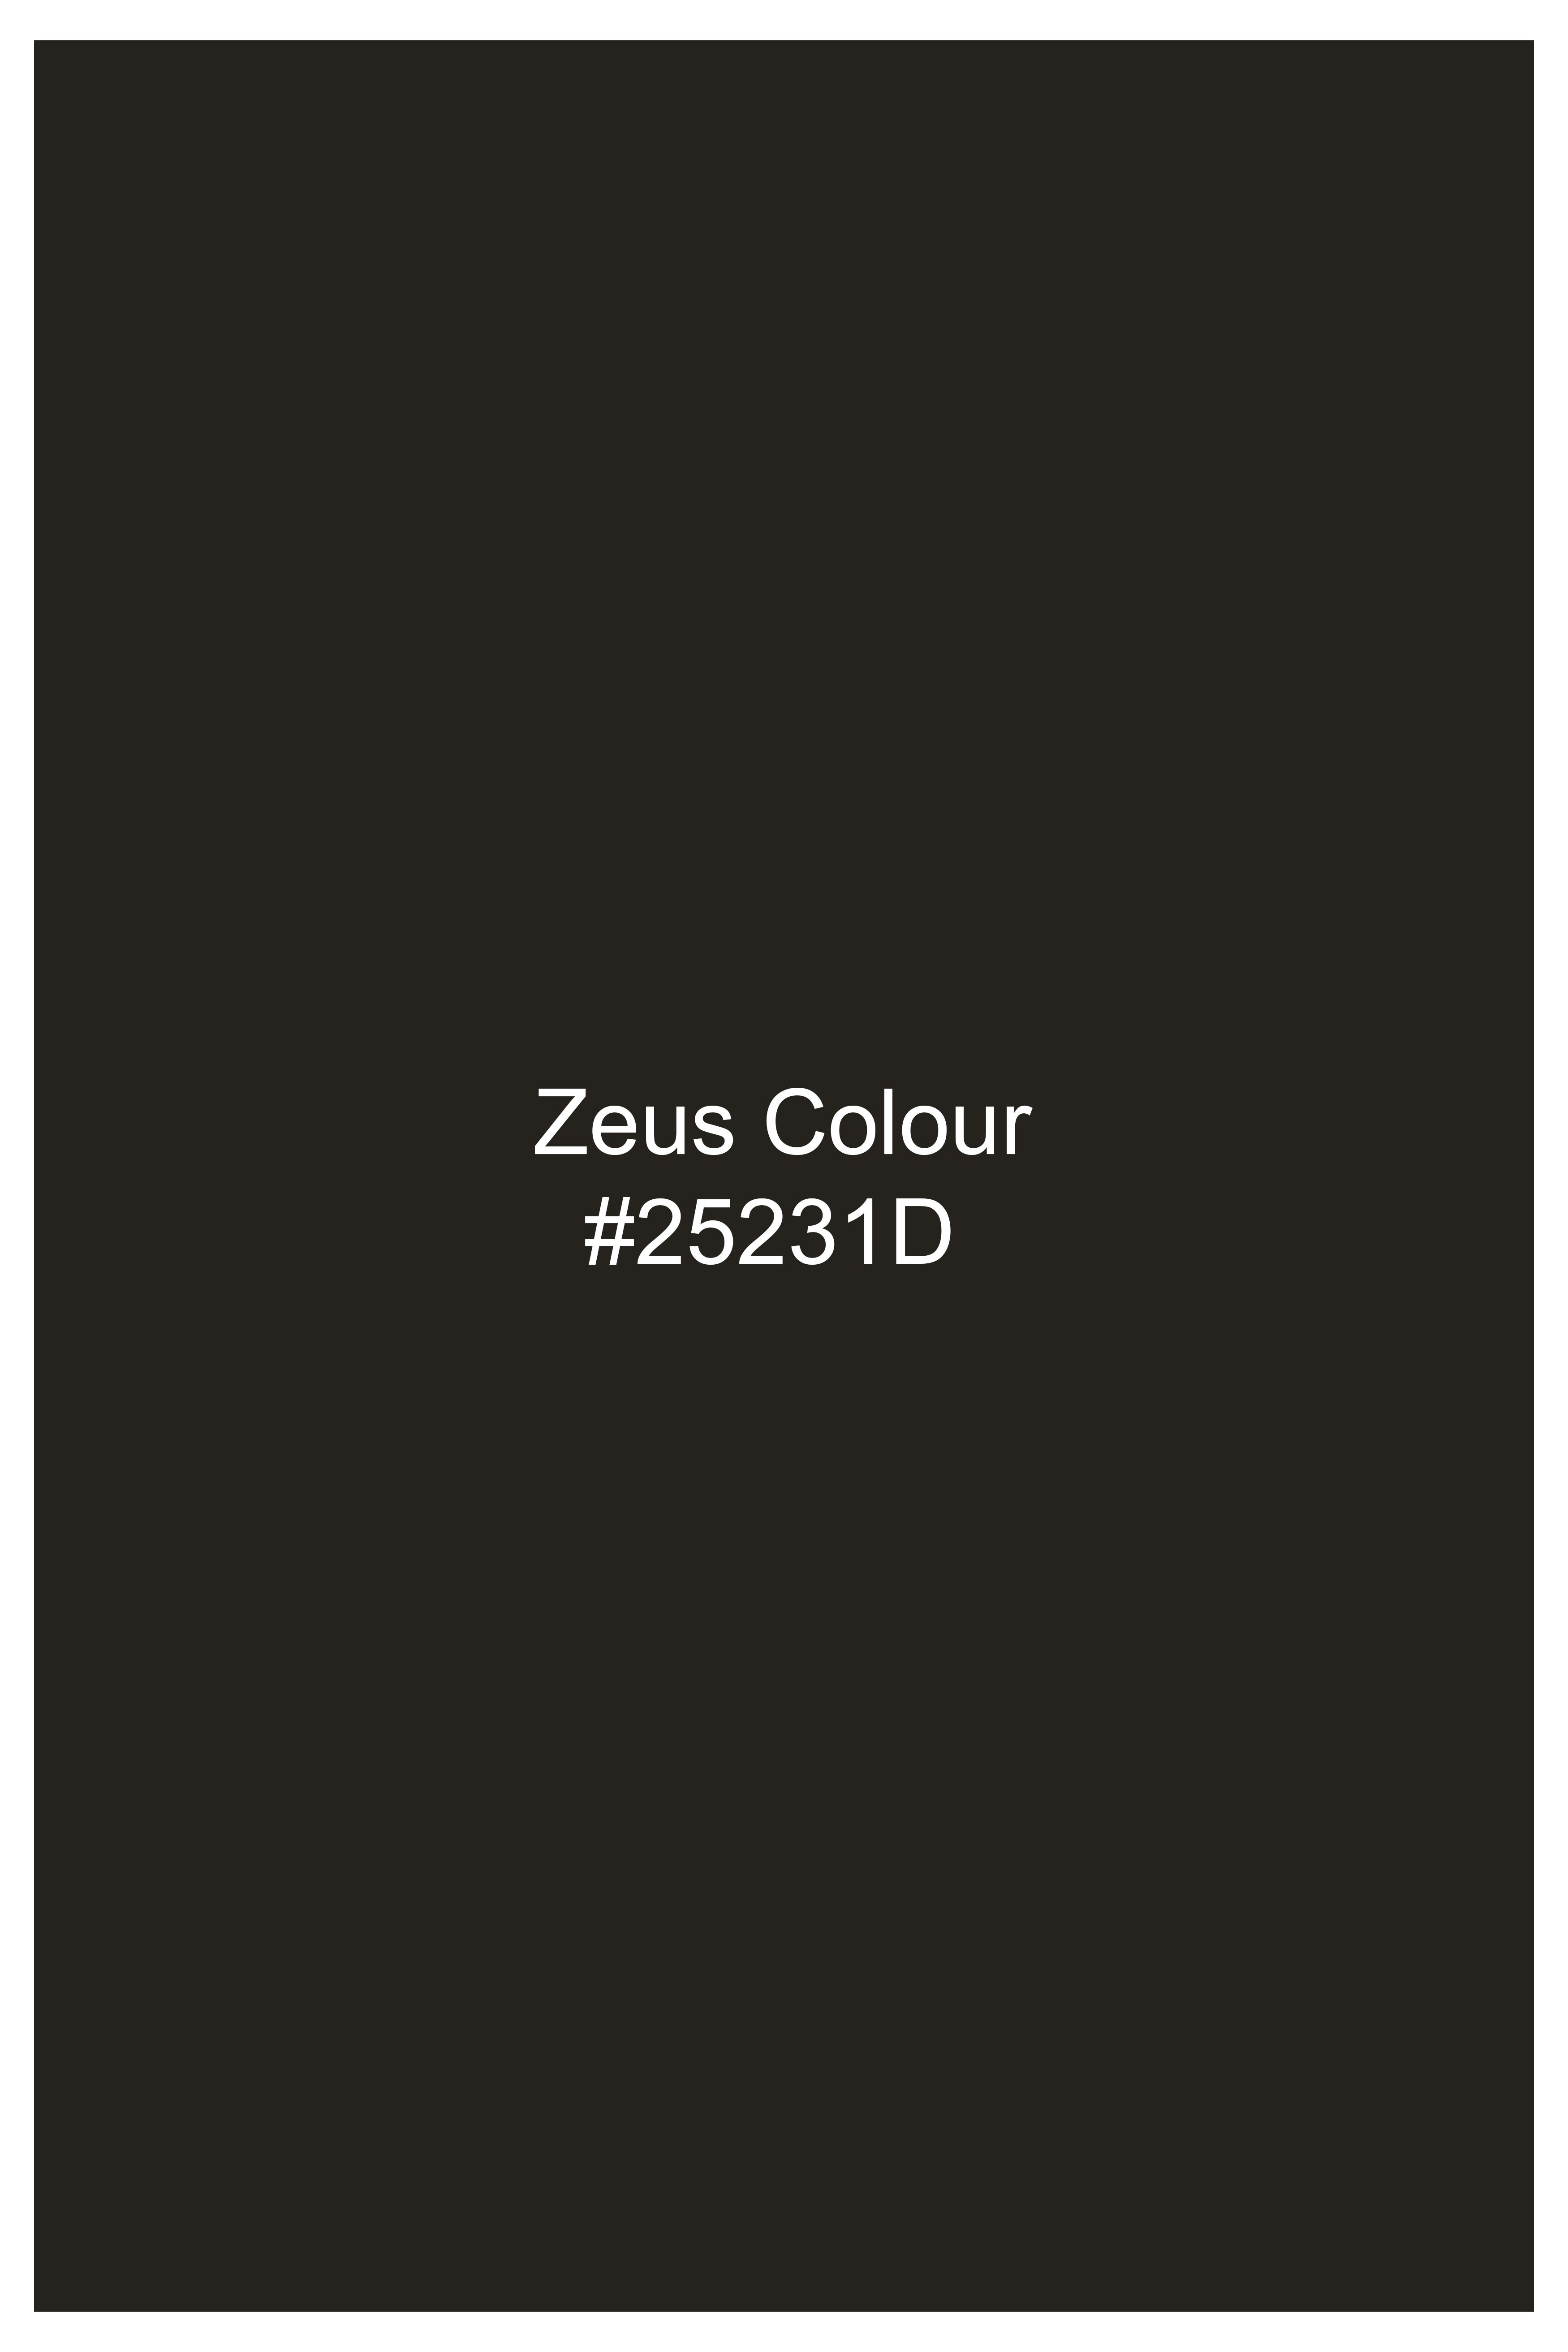 Zeus Brown Wool Rich Stretchable Pant T2952-SW-28, T2952-SW-30, T2952-SW-32, T2952-SW-34, T2952-SW-36, T2952-SW-38, T2952-SW-40, T2952-SW-42, T2952-SW-44